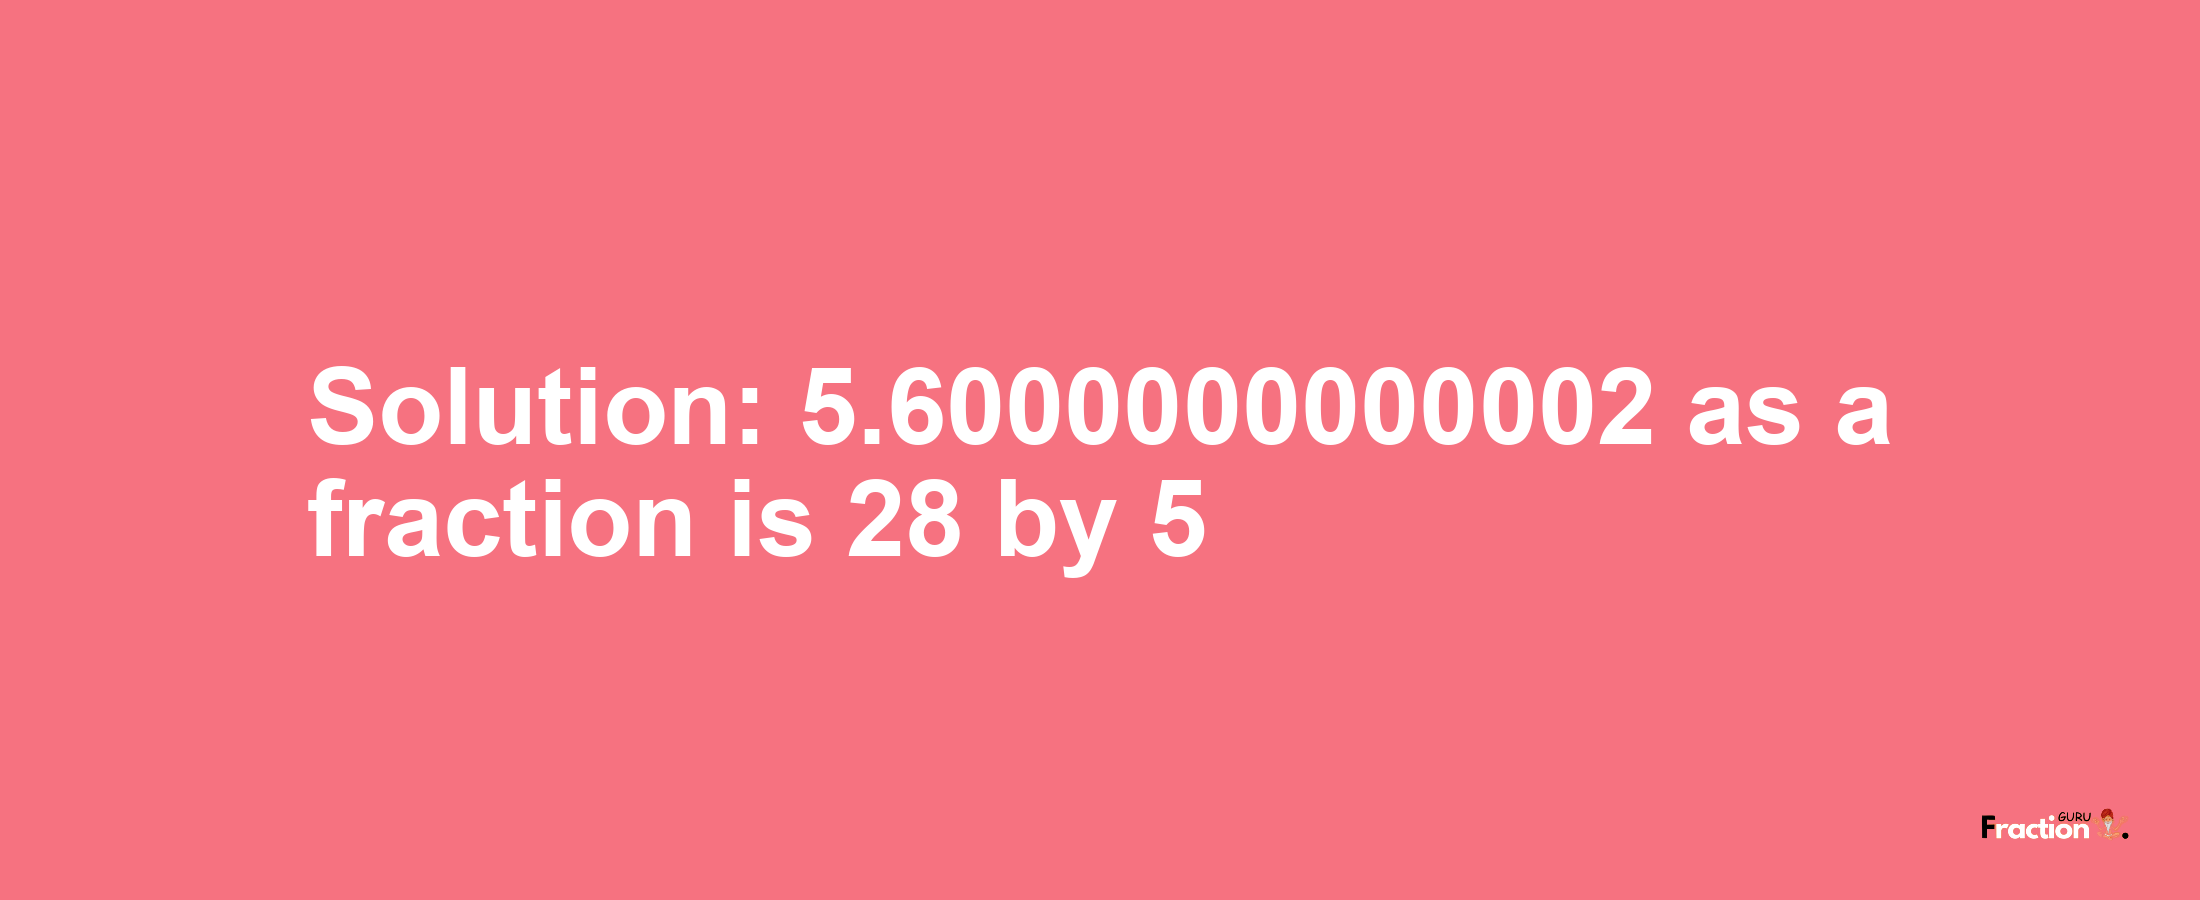 Solution:5.6000000000002 as a fraction is 28/5